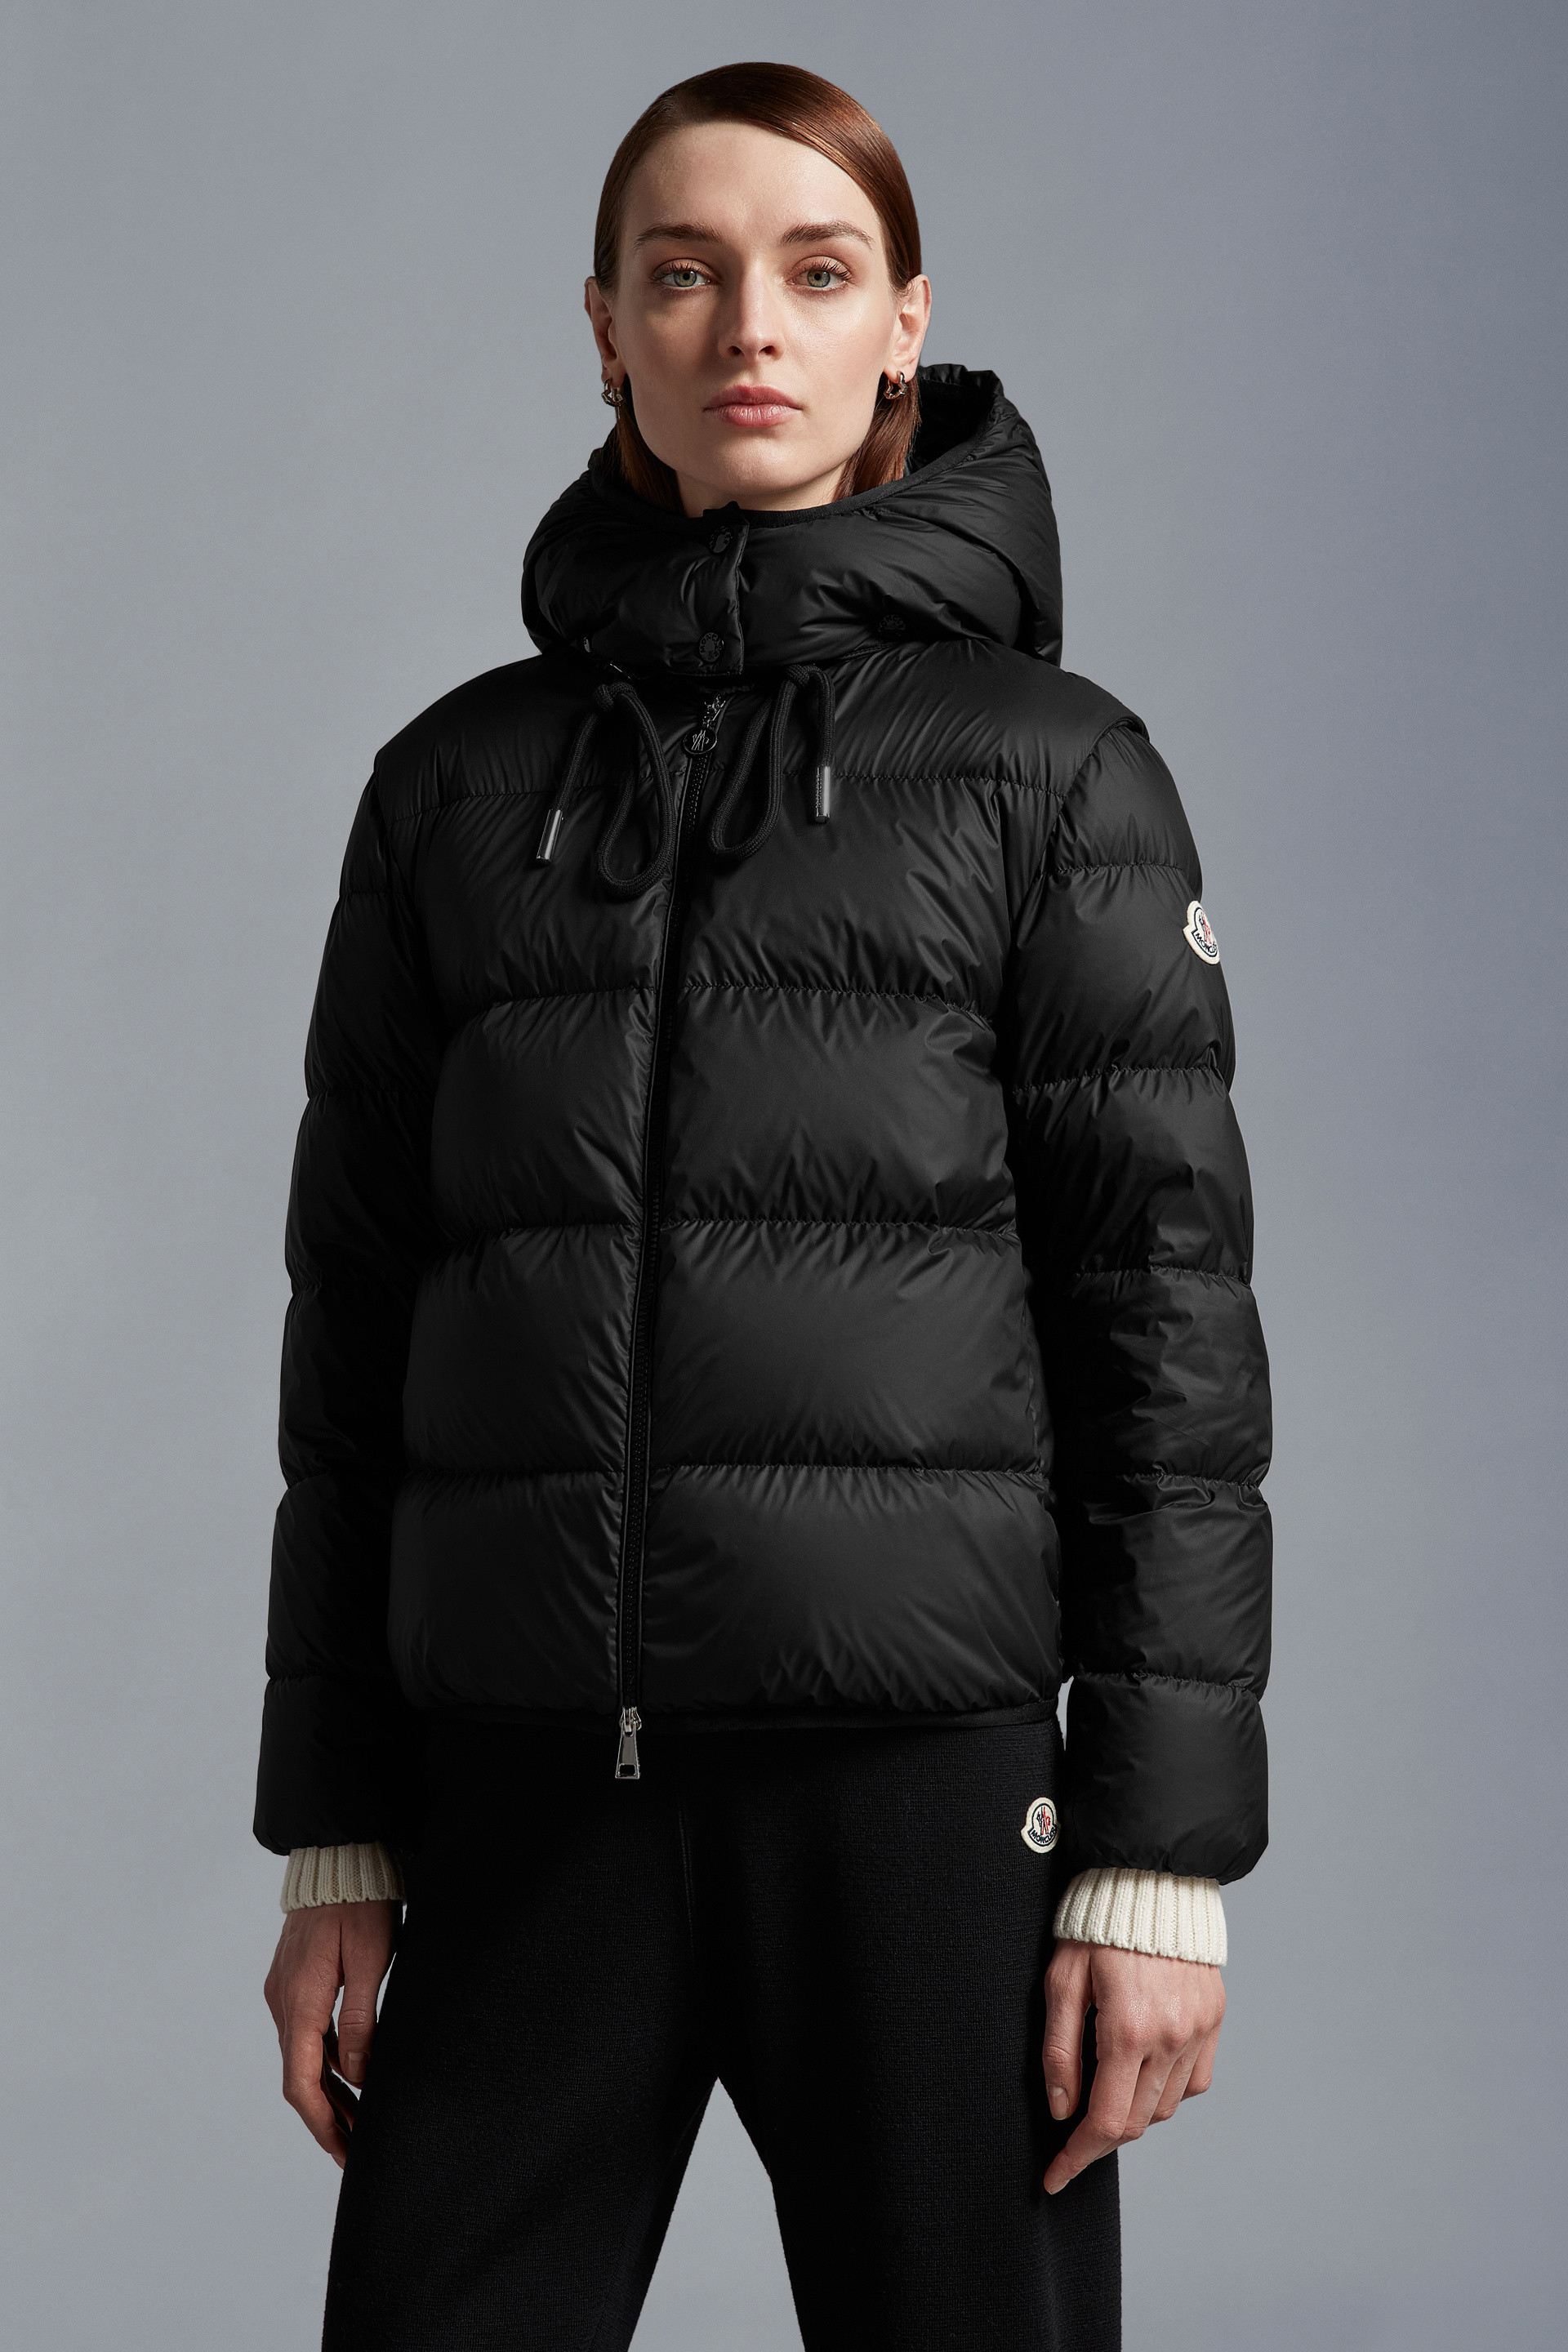 Women's Clothing - New Down Jackets, Dresses & Shoes | Moncler